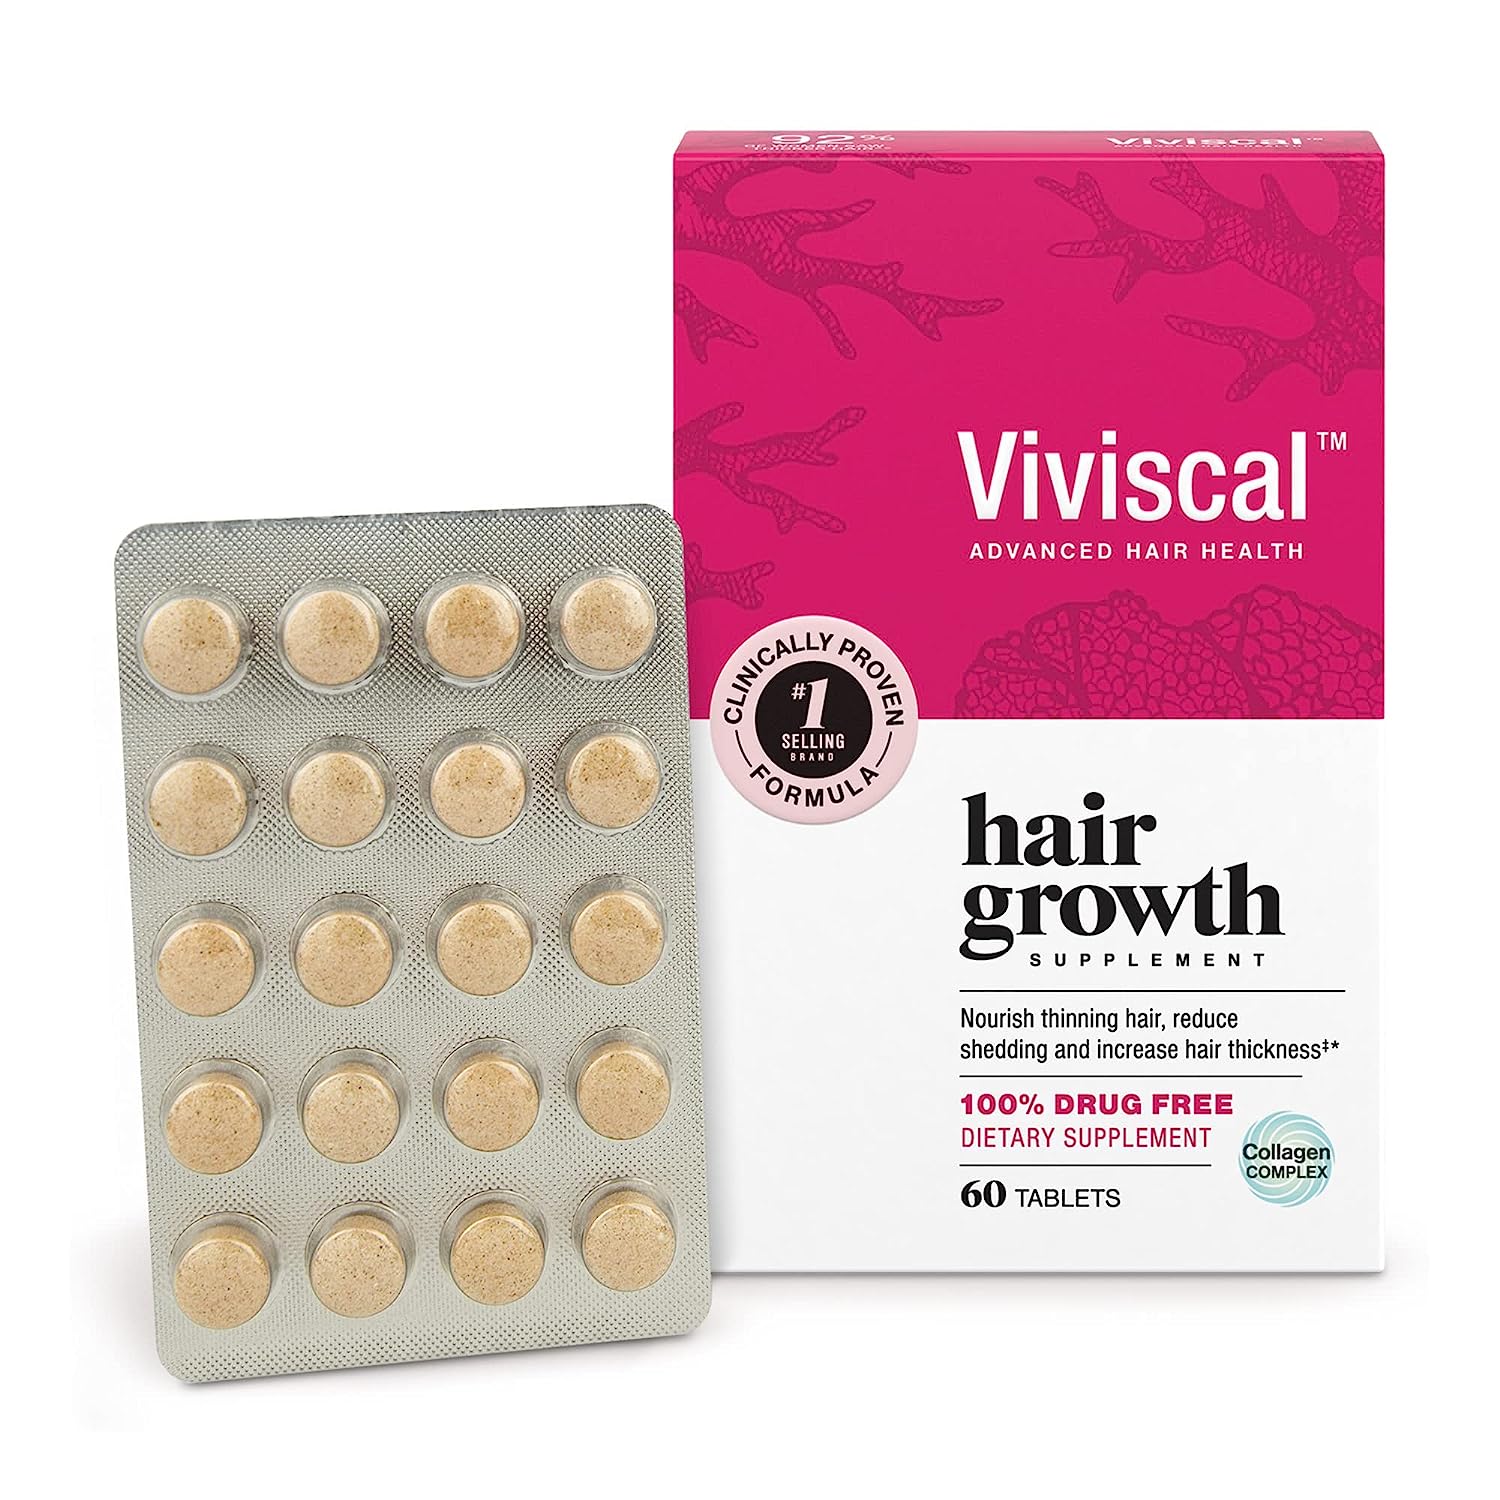 Viviscal 100% Drug Free Advance Hair Health & Growth Dietary Supplements for Women, 60 Count